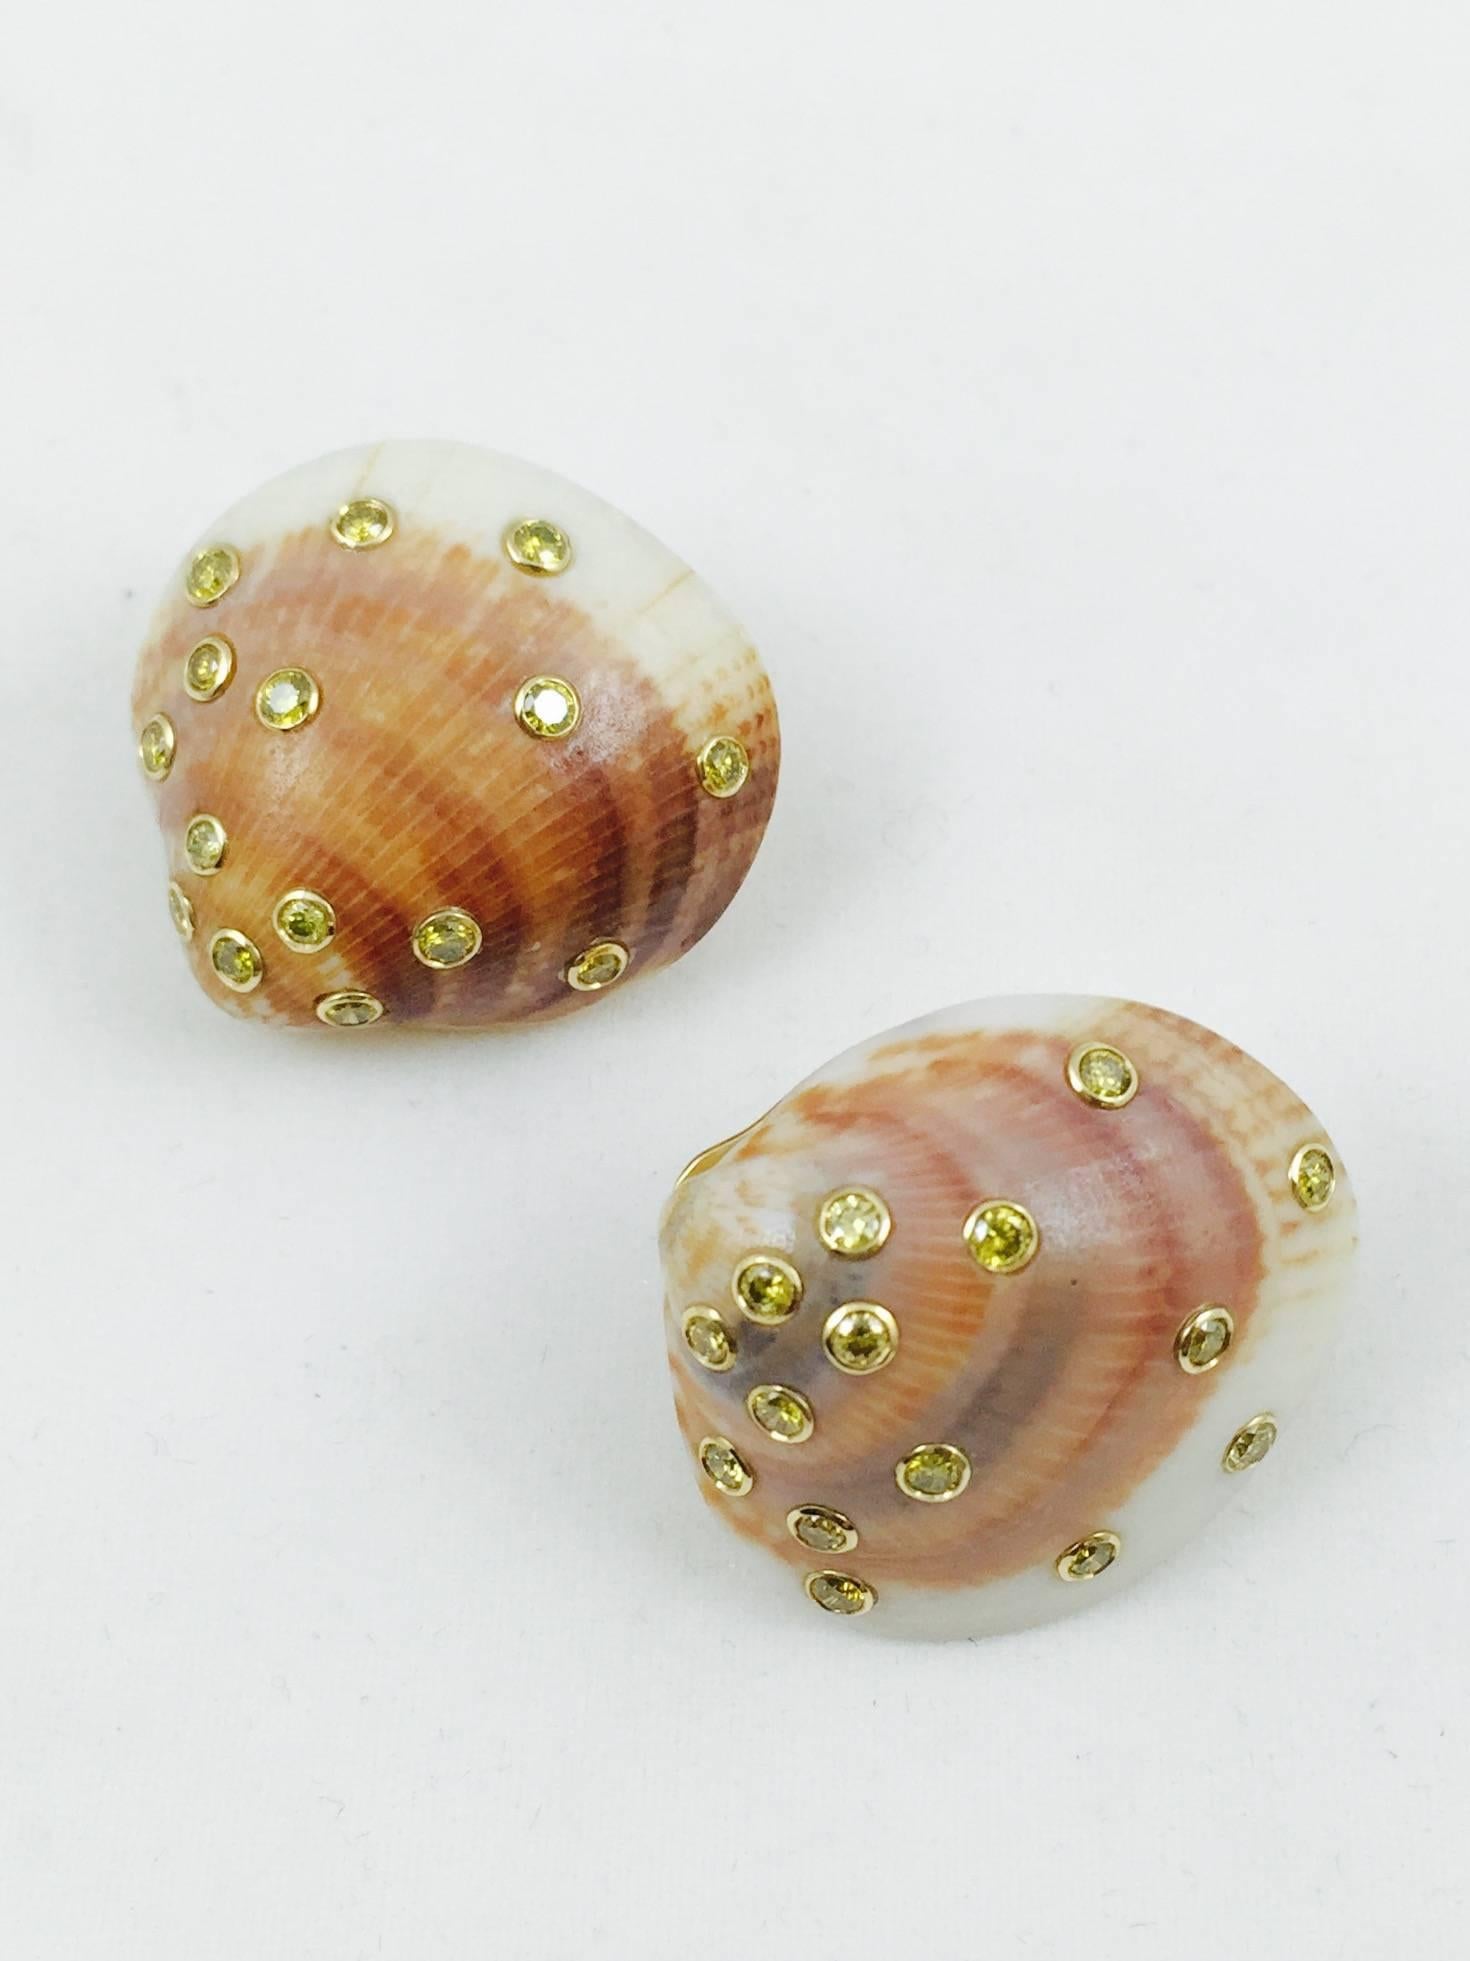 Want to hear the ocean's roar?  These magnificent shells are backed in 18 karat yellow gold with Omega back clip on. What takes these earrings to the upper levels are the bezel set Fancy Yellow Diamonds sprinkled on their surface.  34 round, fully